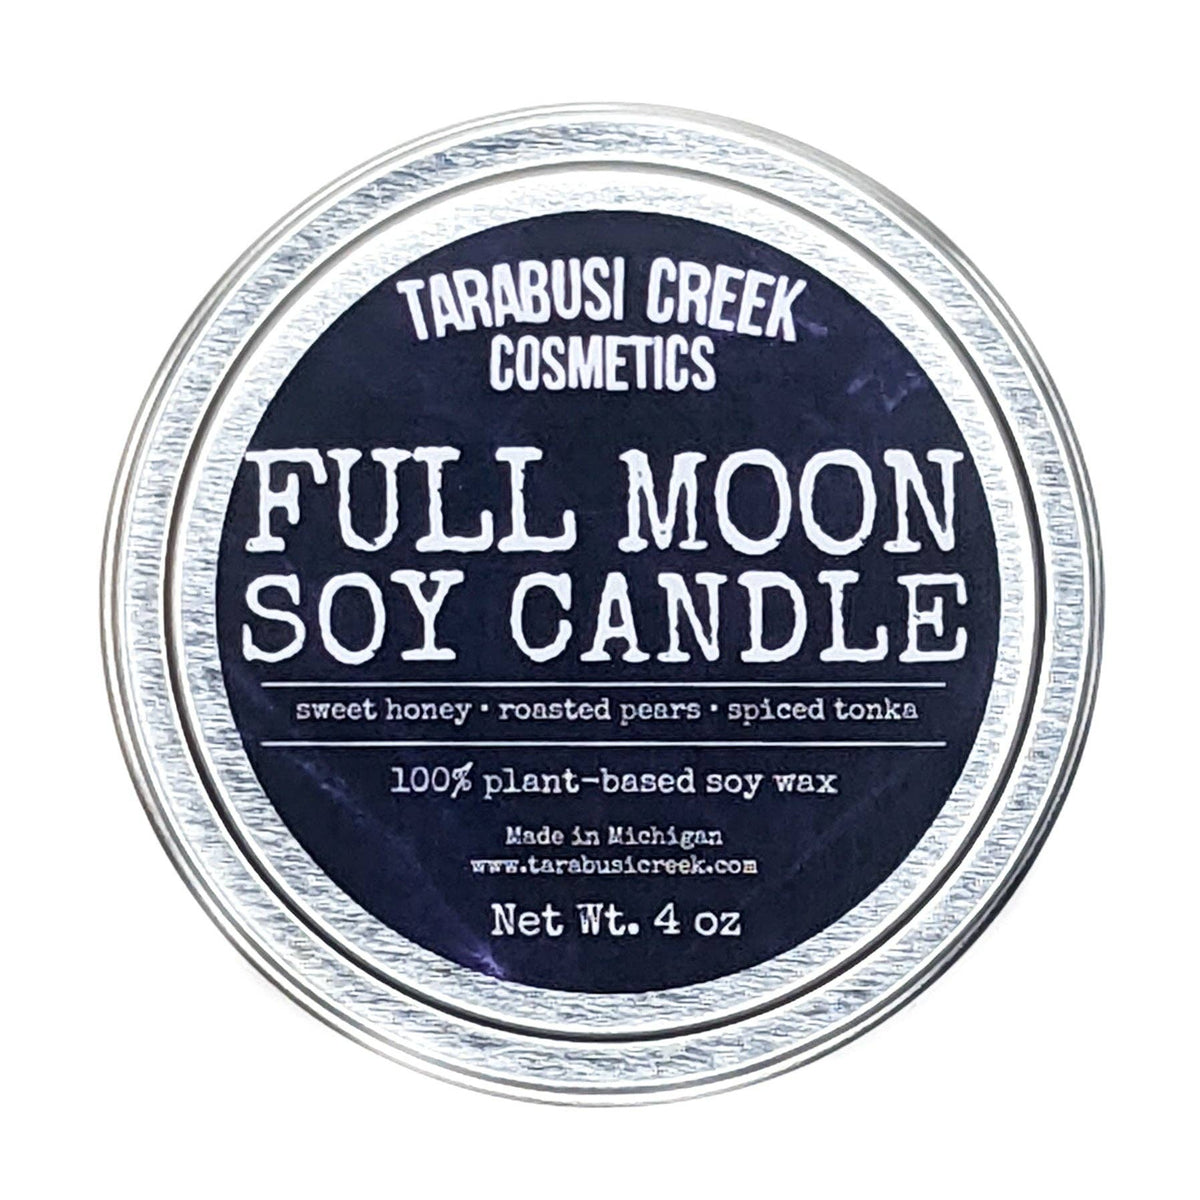 Full Moon Soy Candle